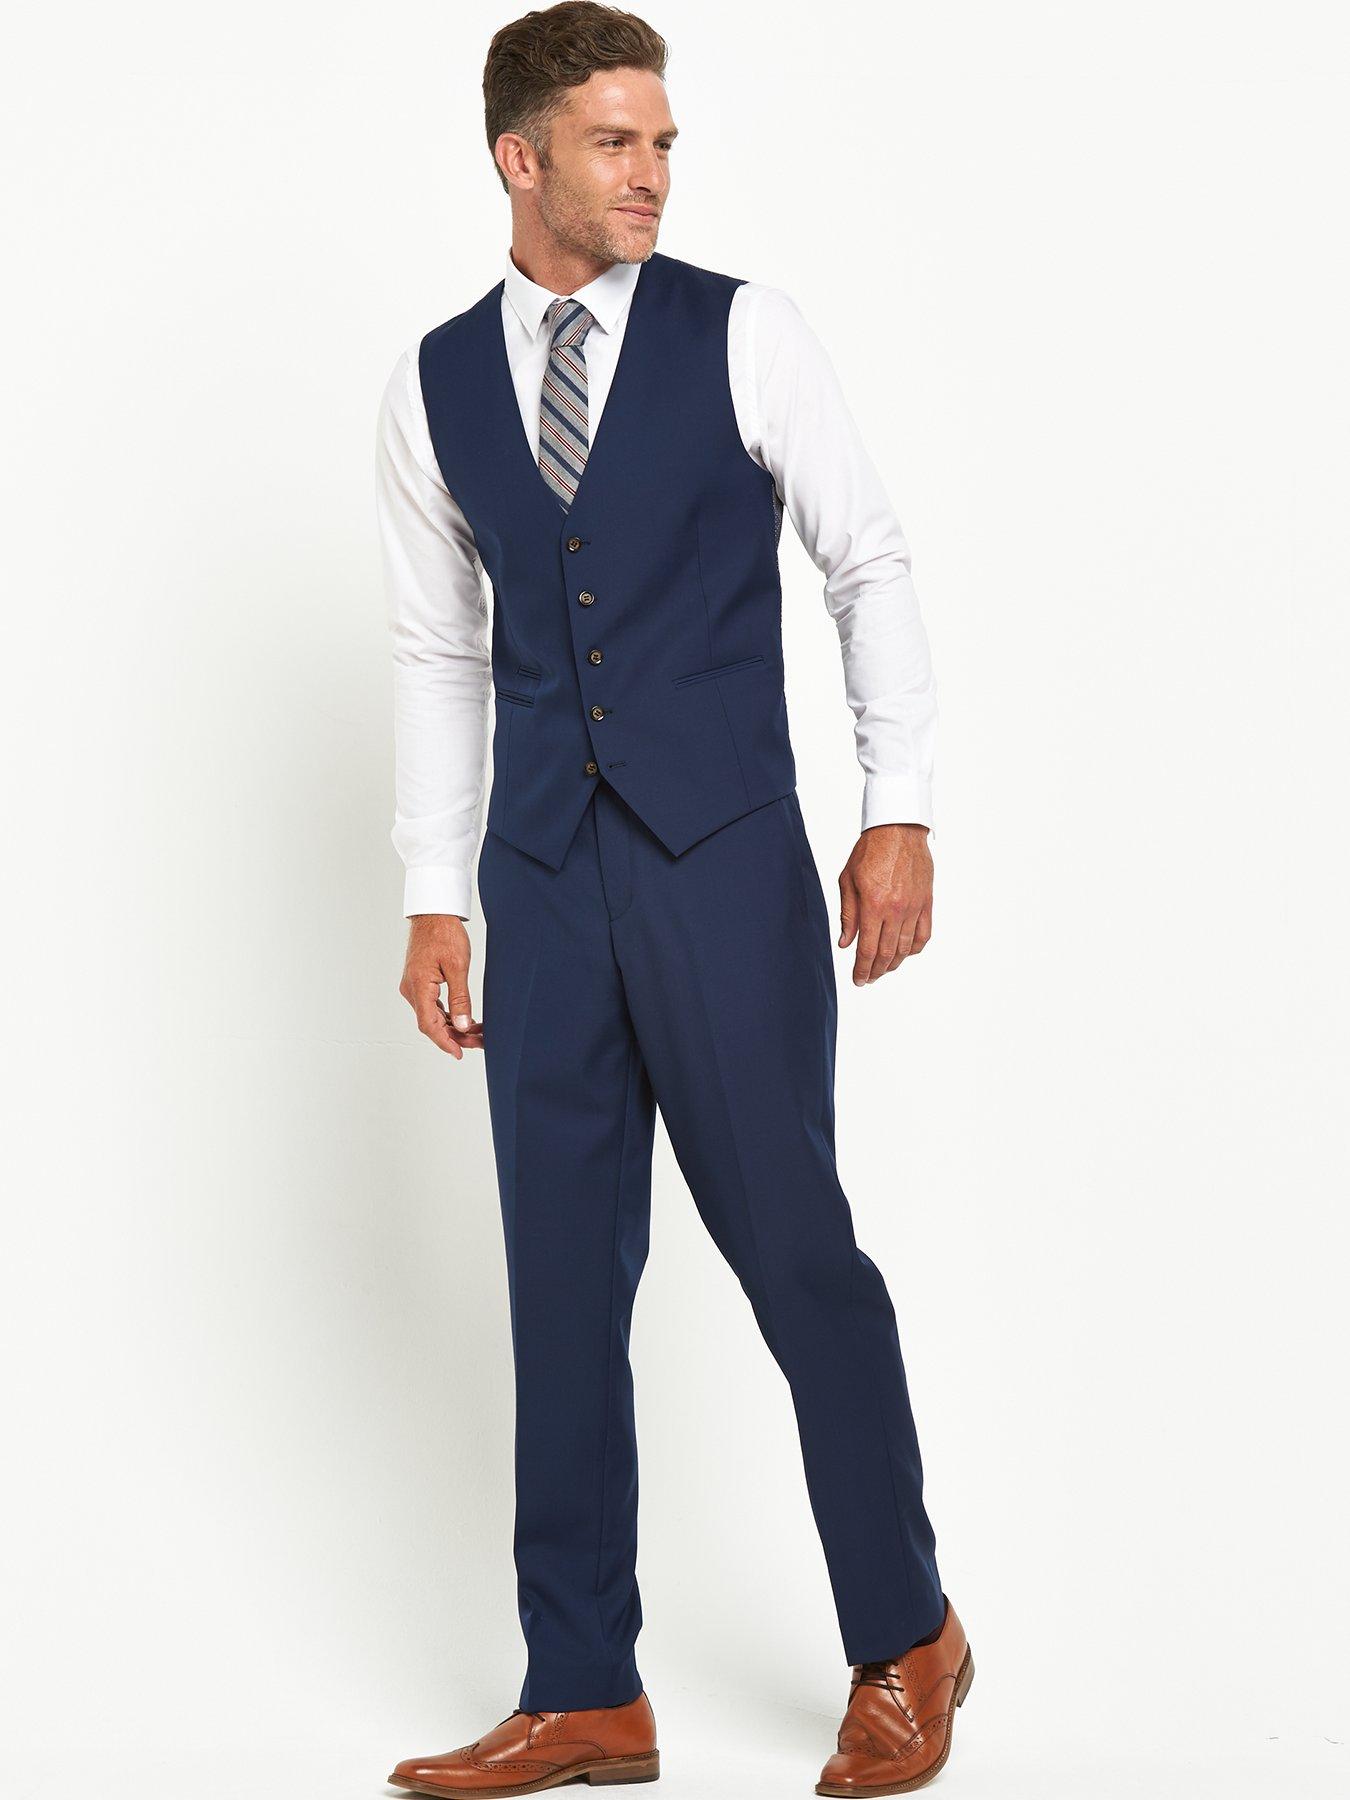 Black peak lapel Morning Suit with beige waistcoat and regular fit grey  Trousers